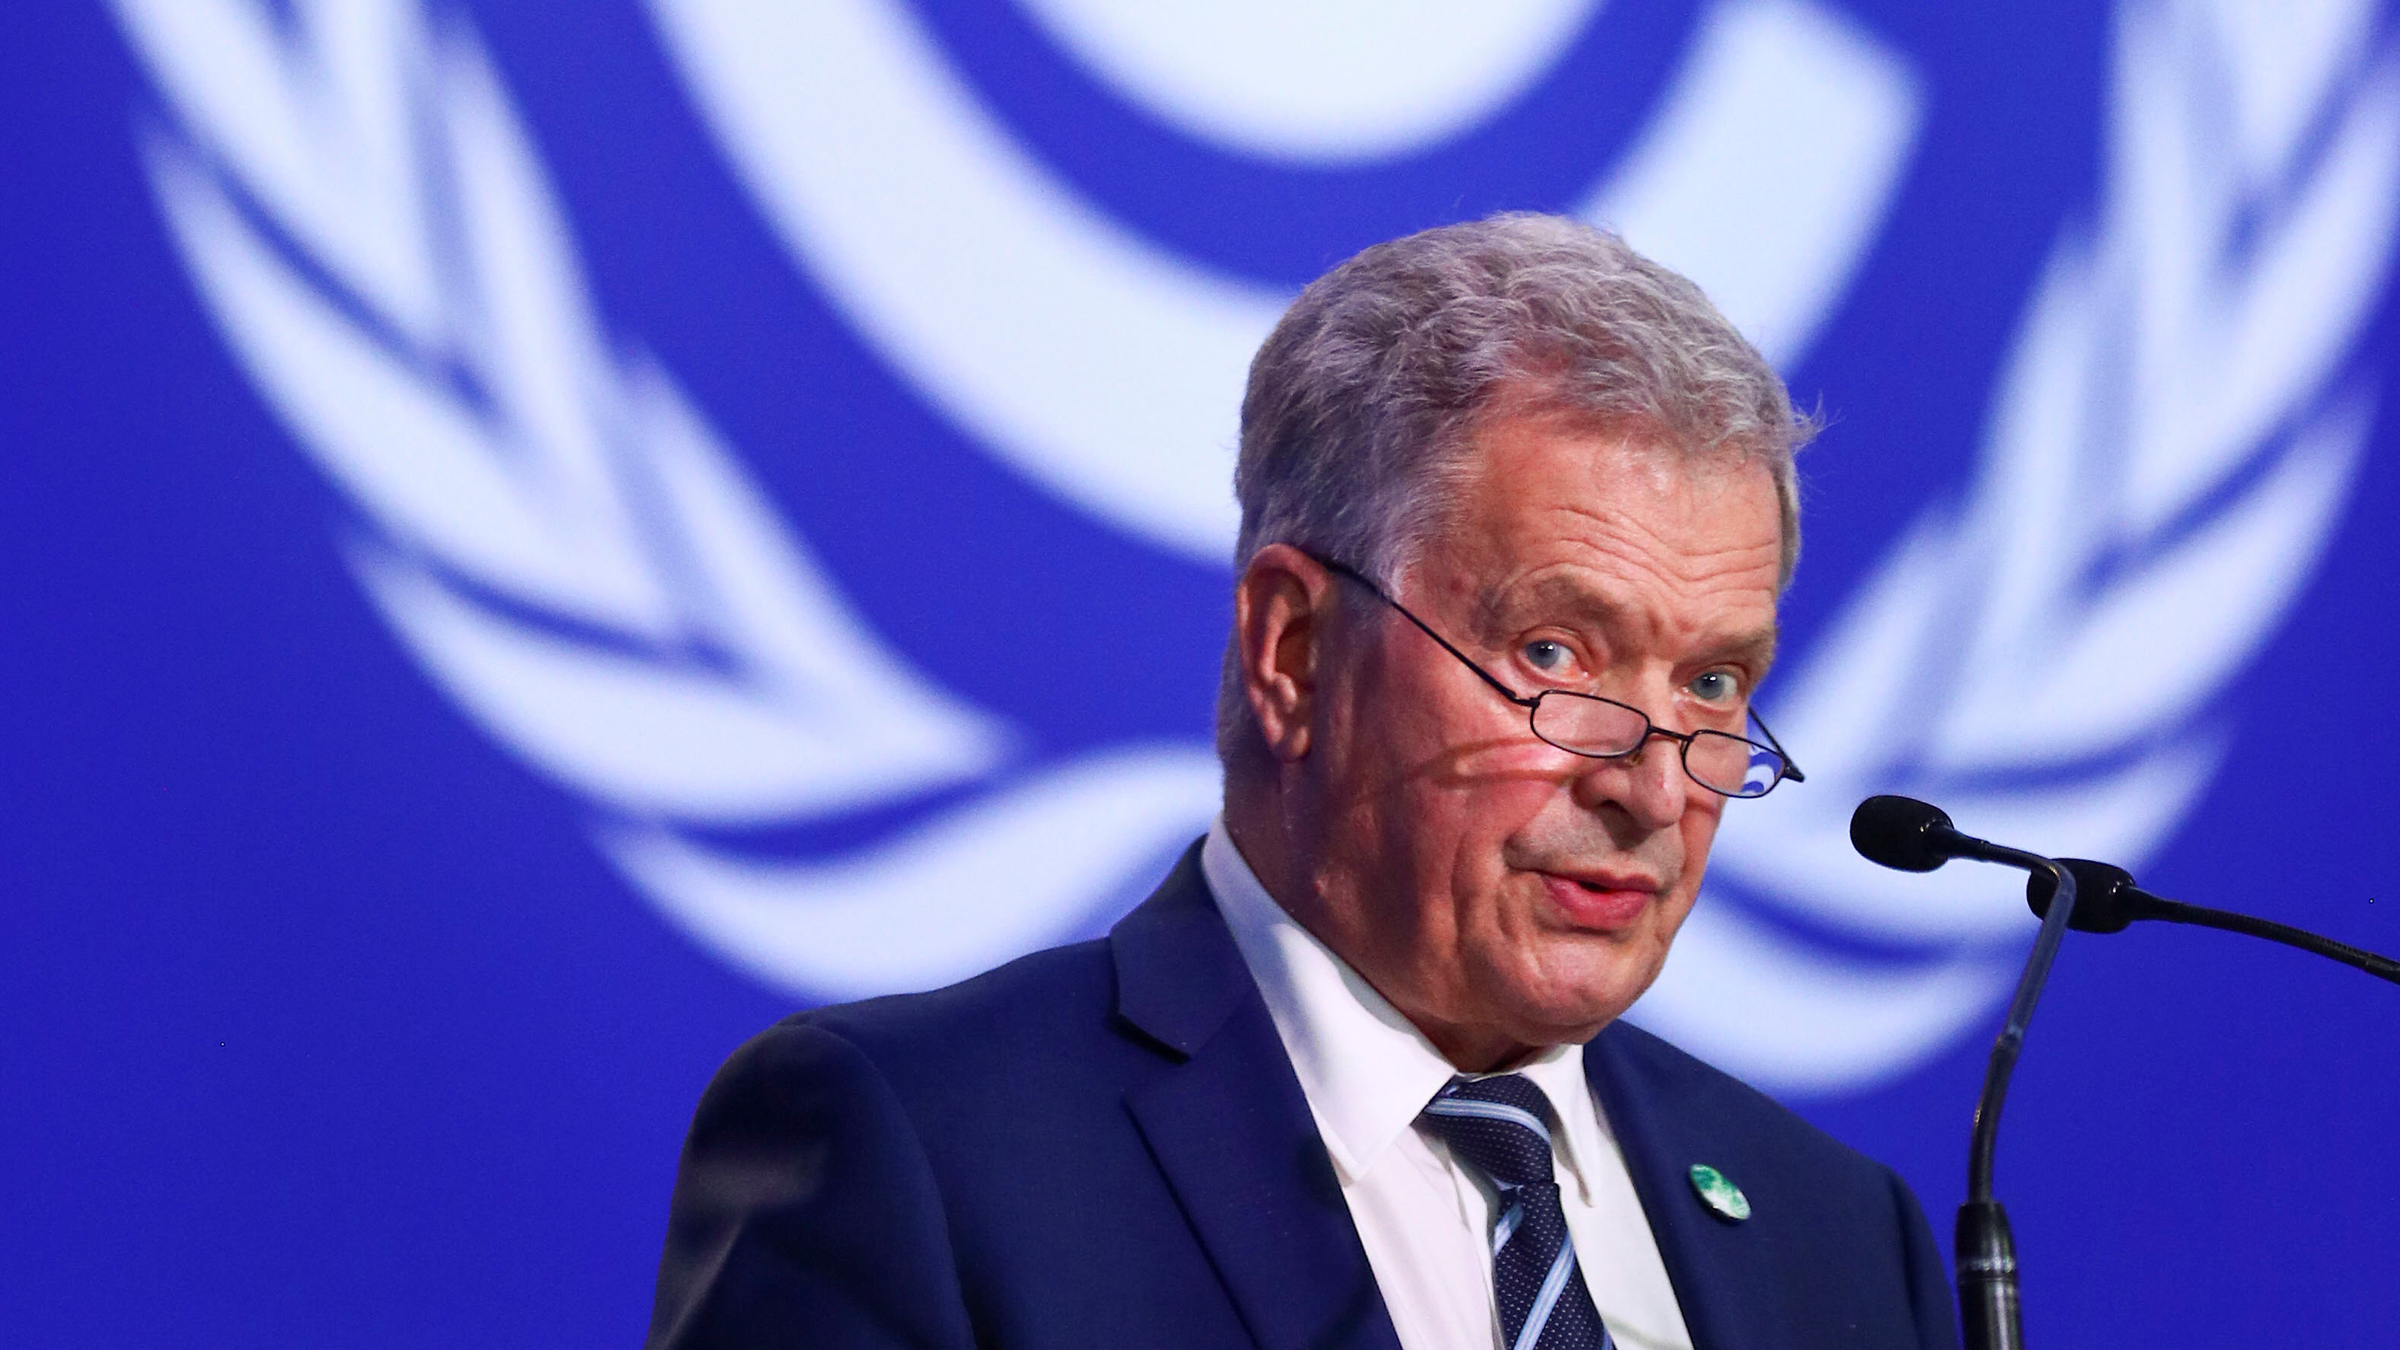 Finland's President Sauli Niinistö speaks during the UN Climate Change Conference November 2, 2021, in Glasgow, Scotland. 